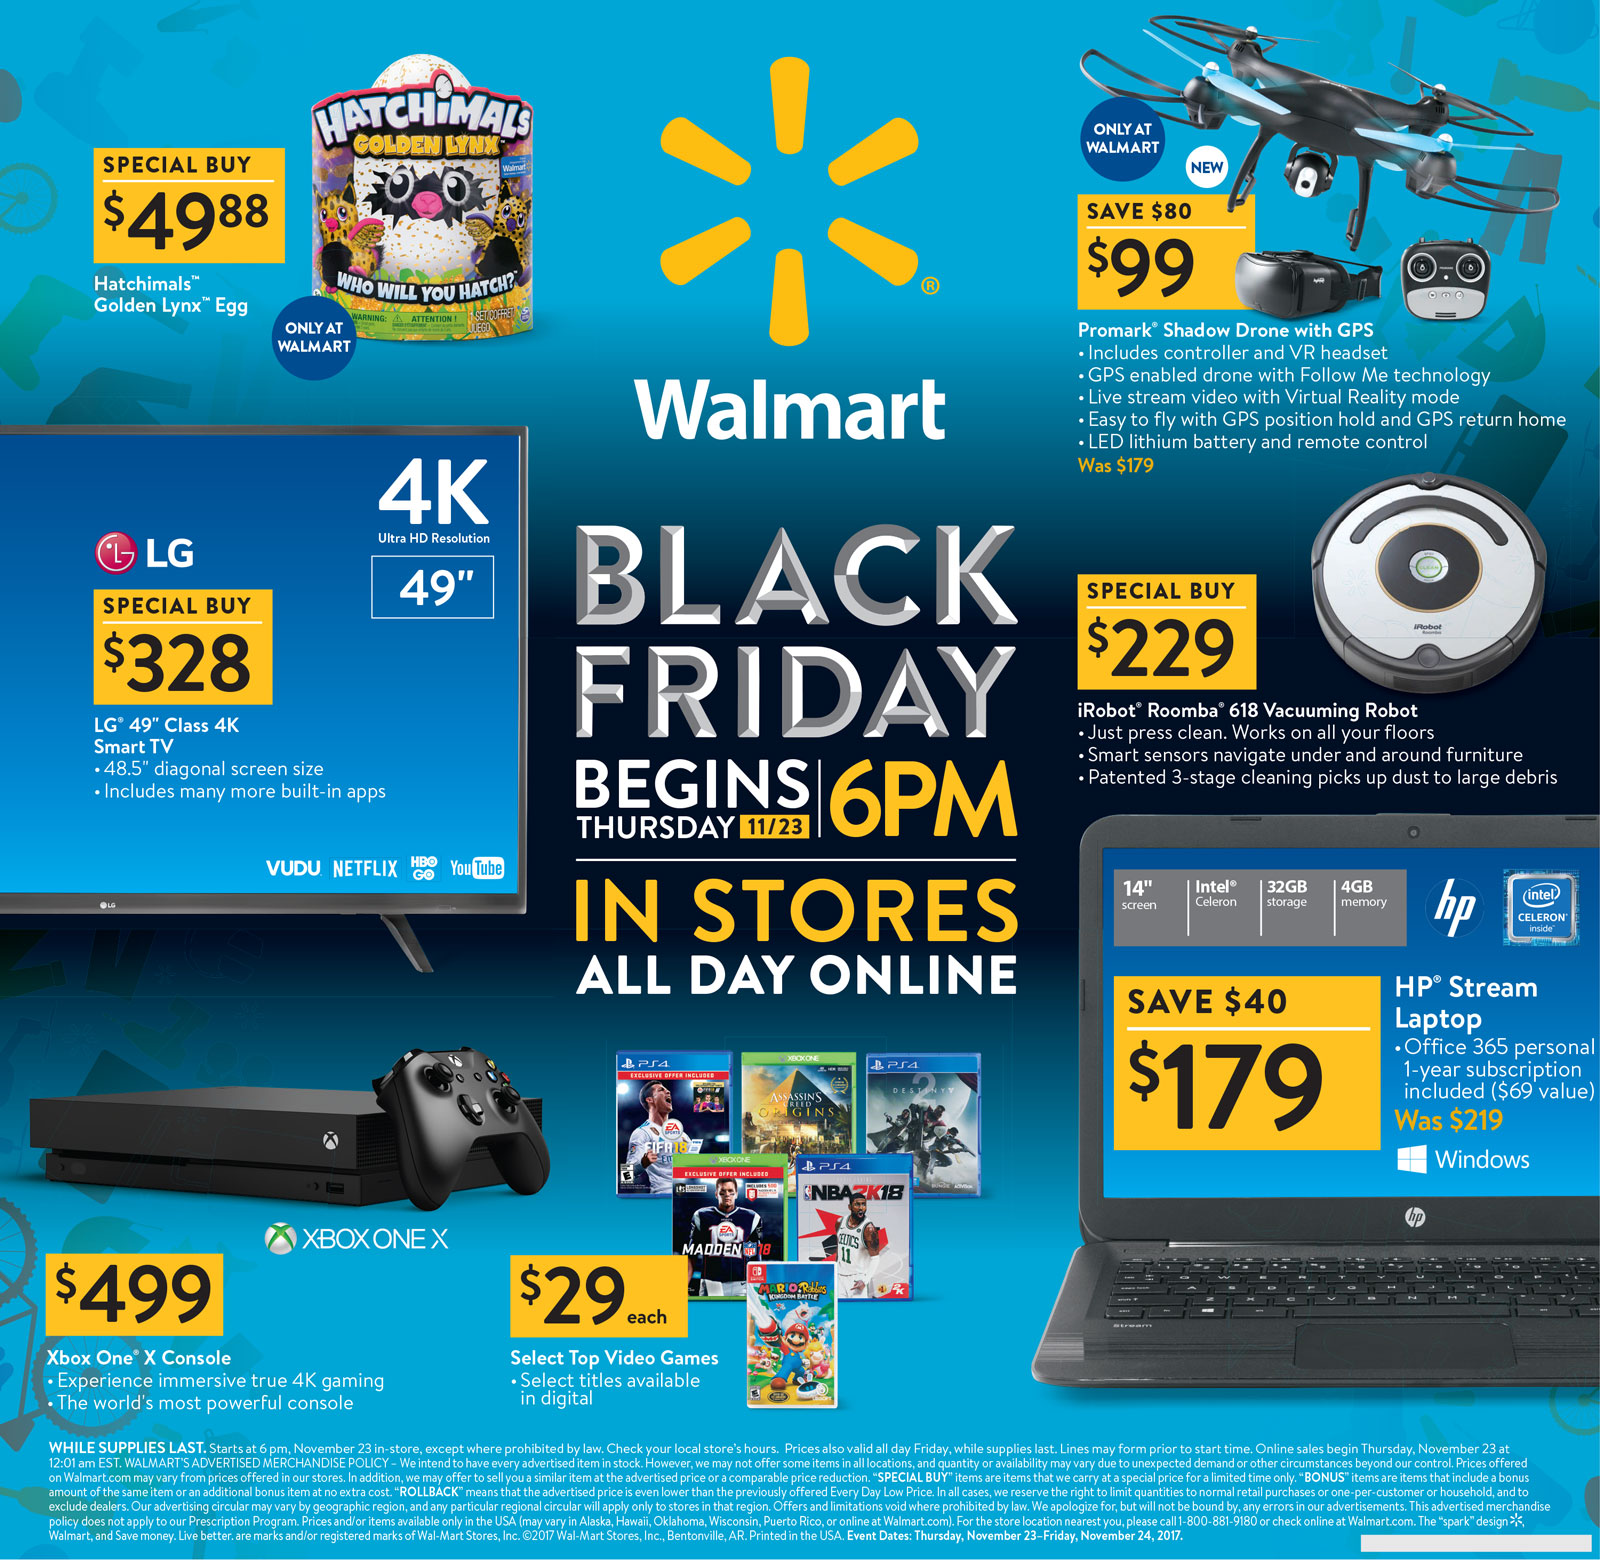 Walmart announces Black Friday 2017 plans: Everything you need to know ...